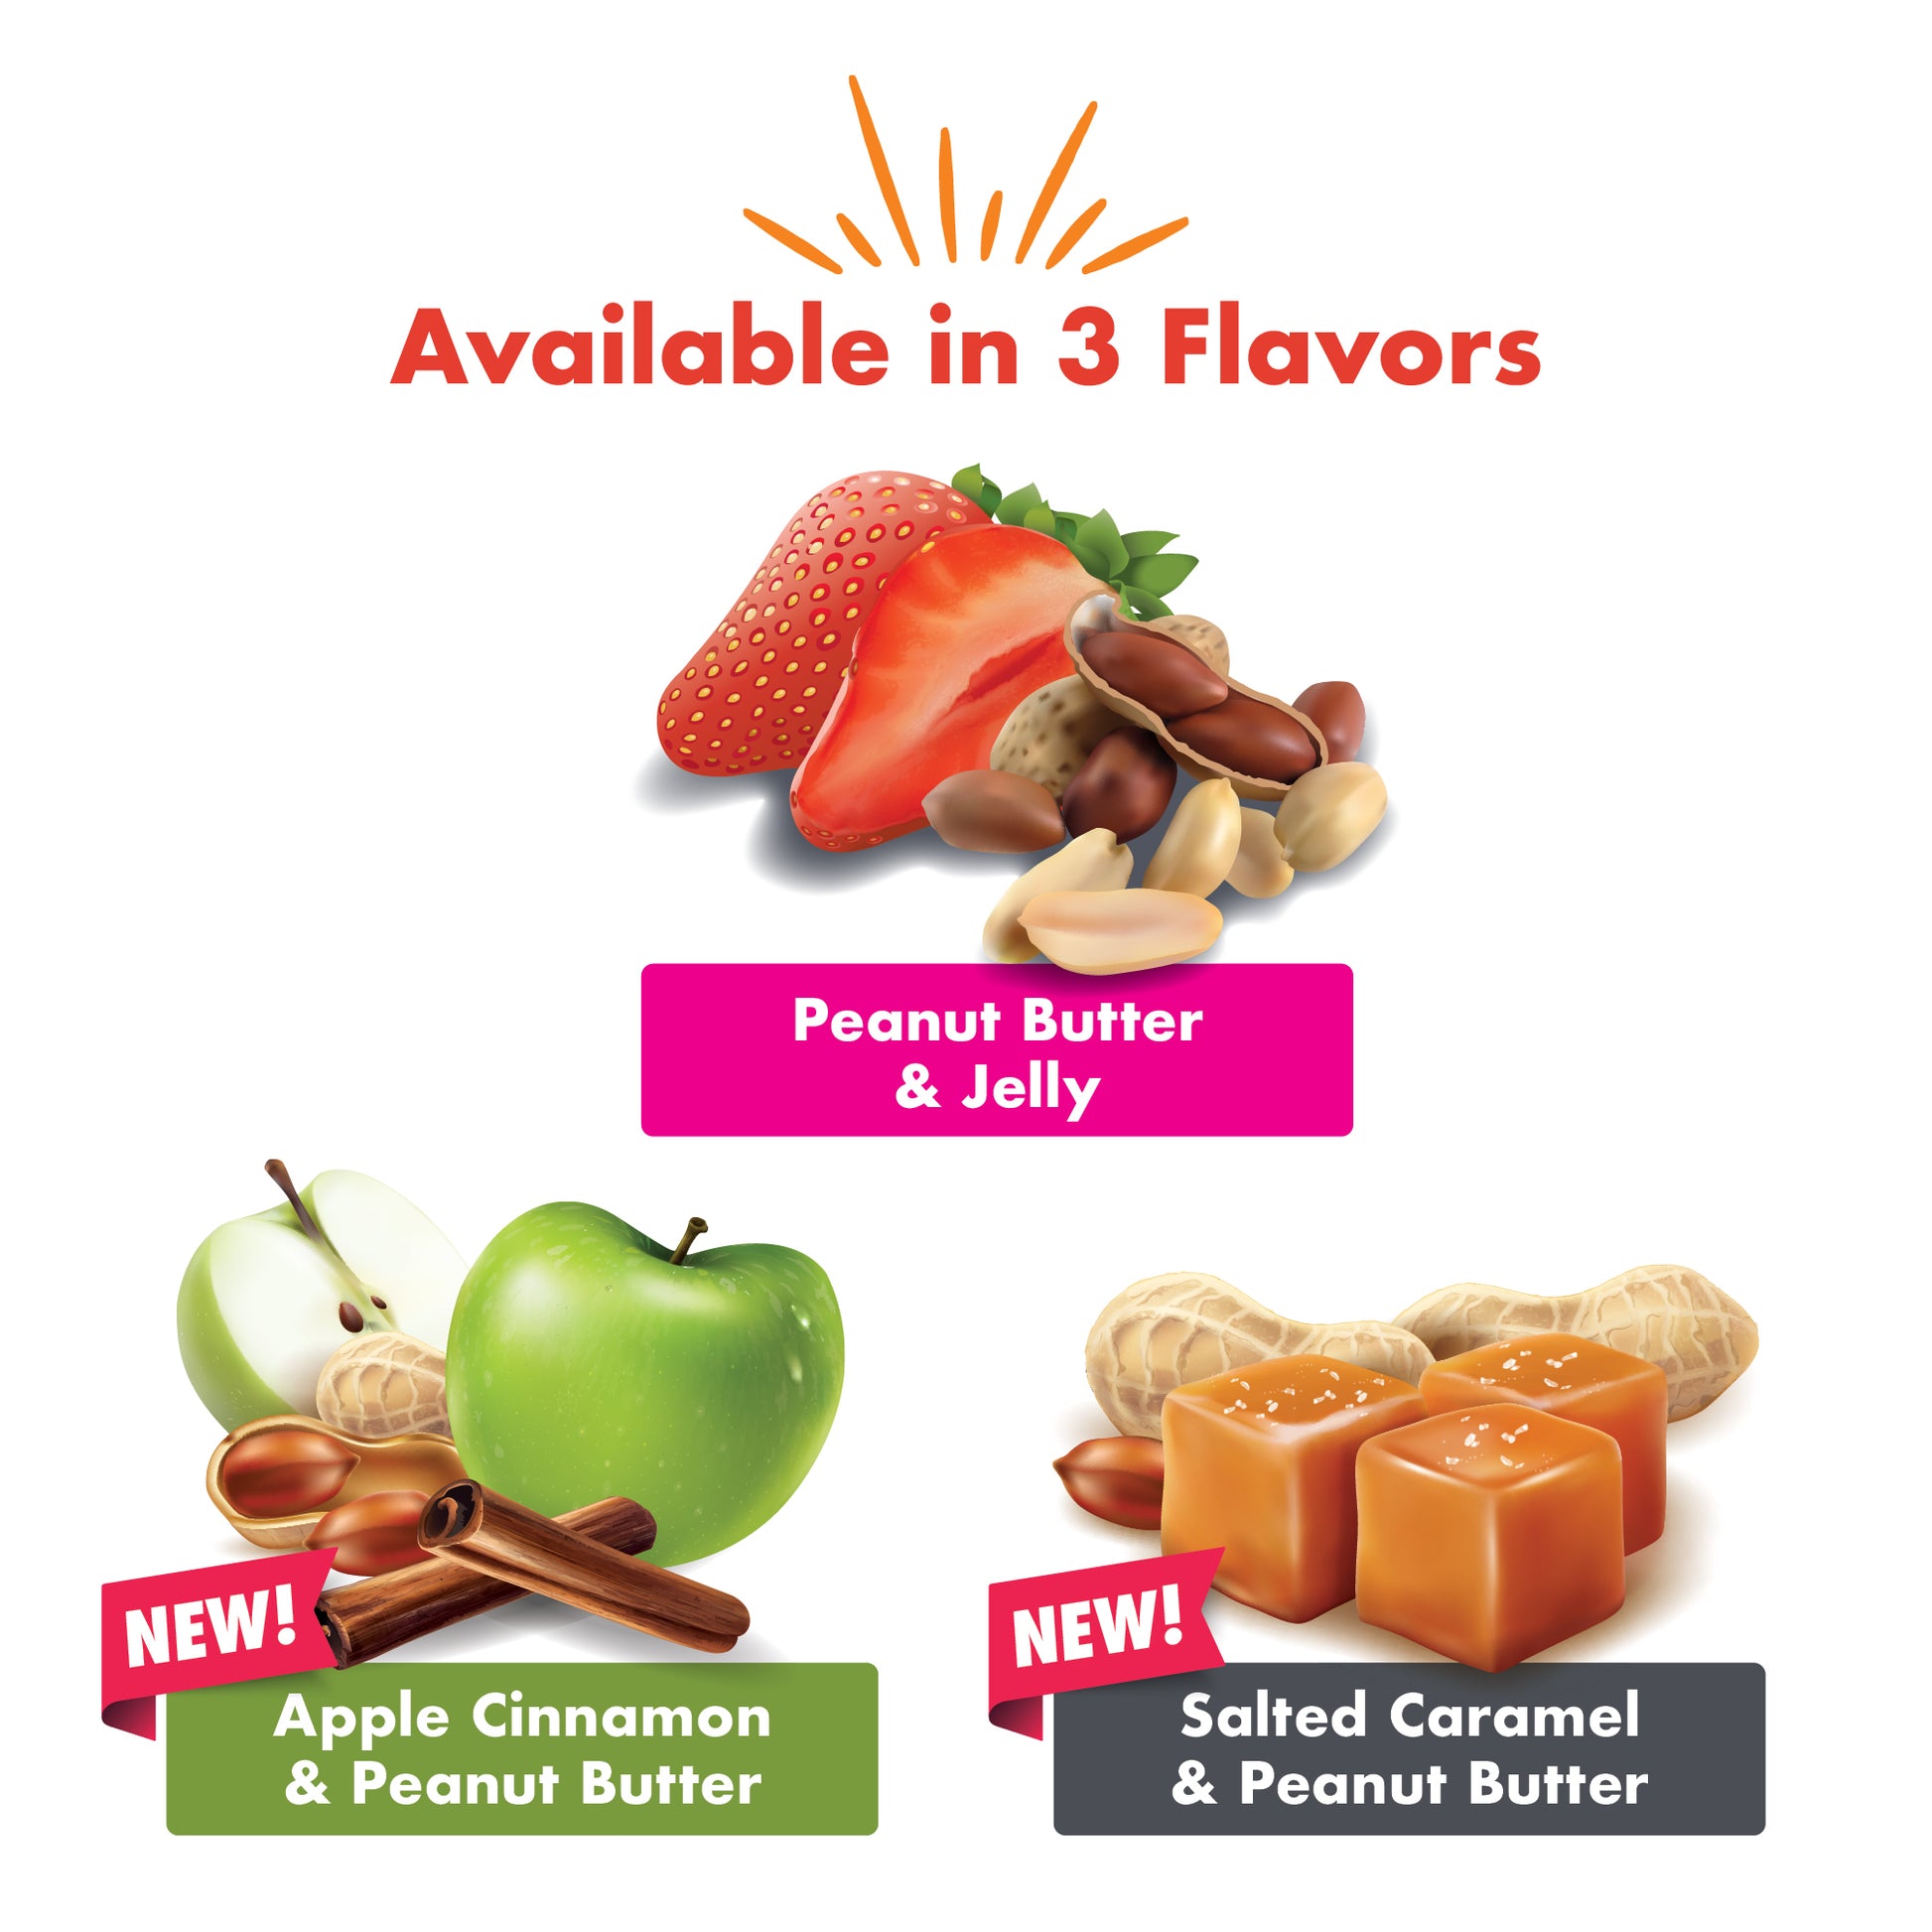 Plant Based Protein Bars are available in 3 flavors: Apple Cinnamon Peanut Butter, Salted Caramel Peanut Butter, and Peanut Butter & Jelly.